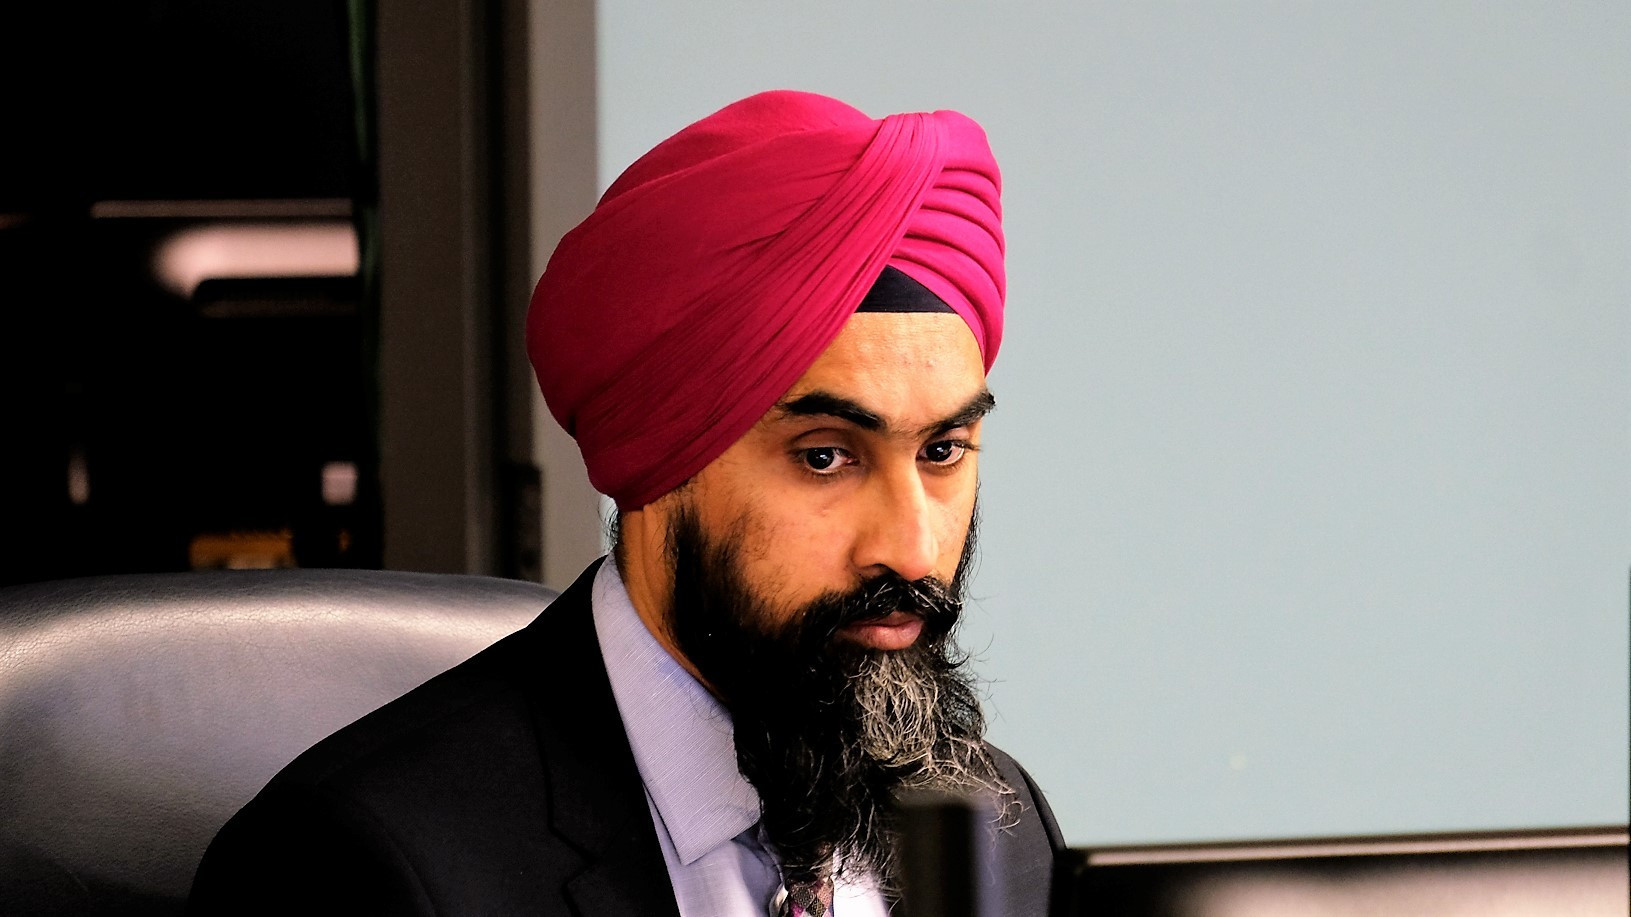 Woman who accused former Brampton councillor Dhillon of sexual assault withdrew allegations in October, confidential City memo reveals 